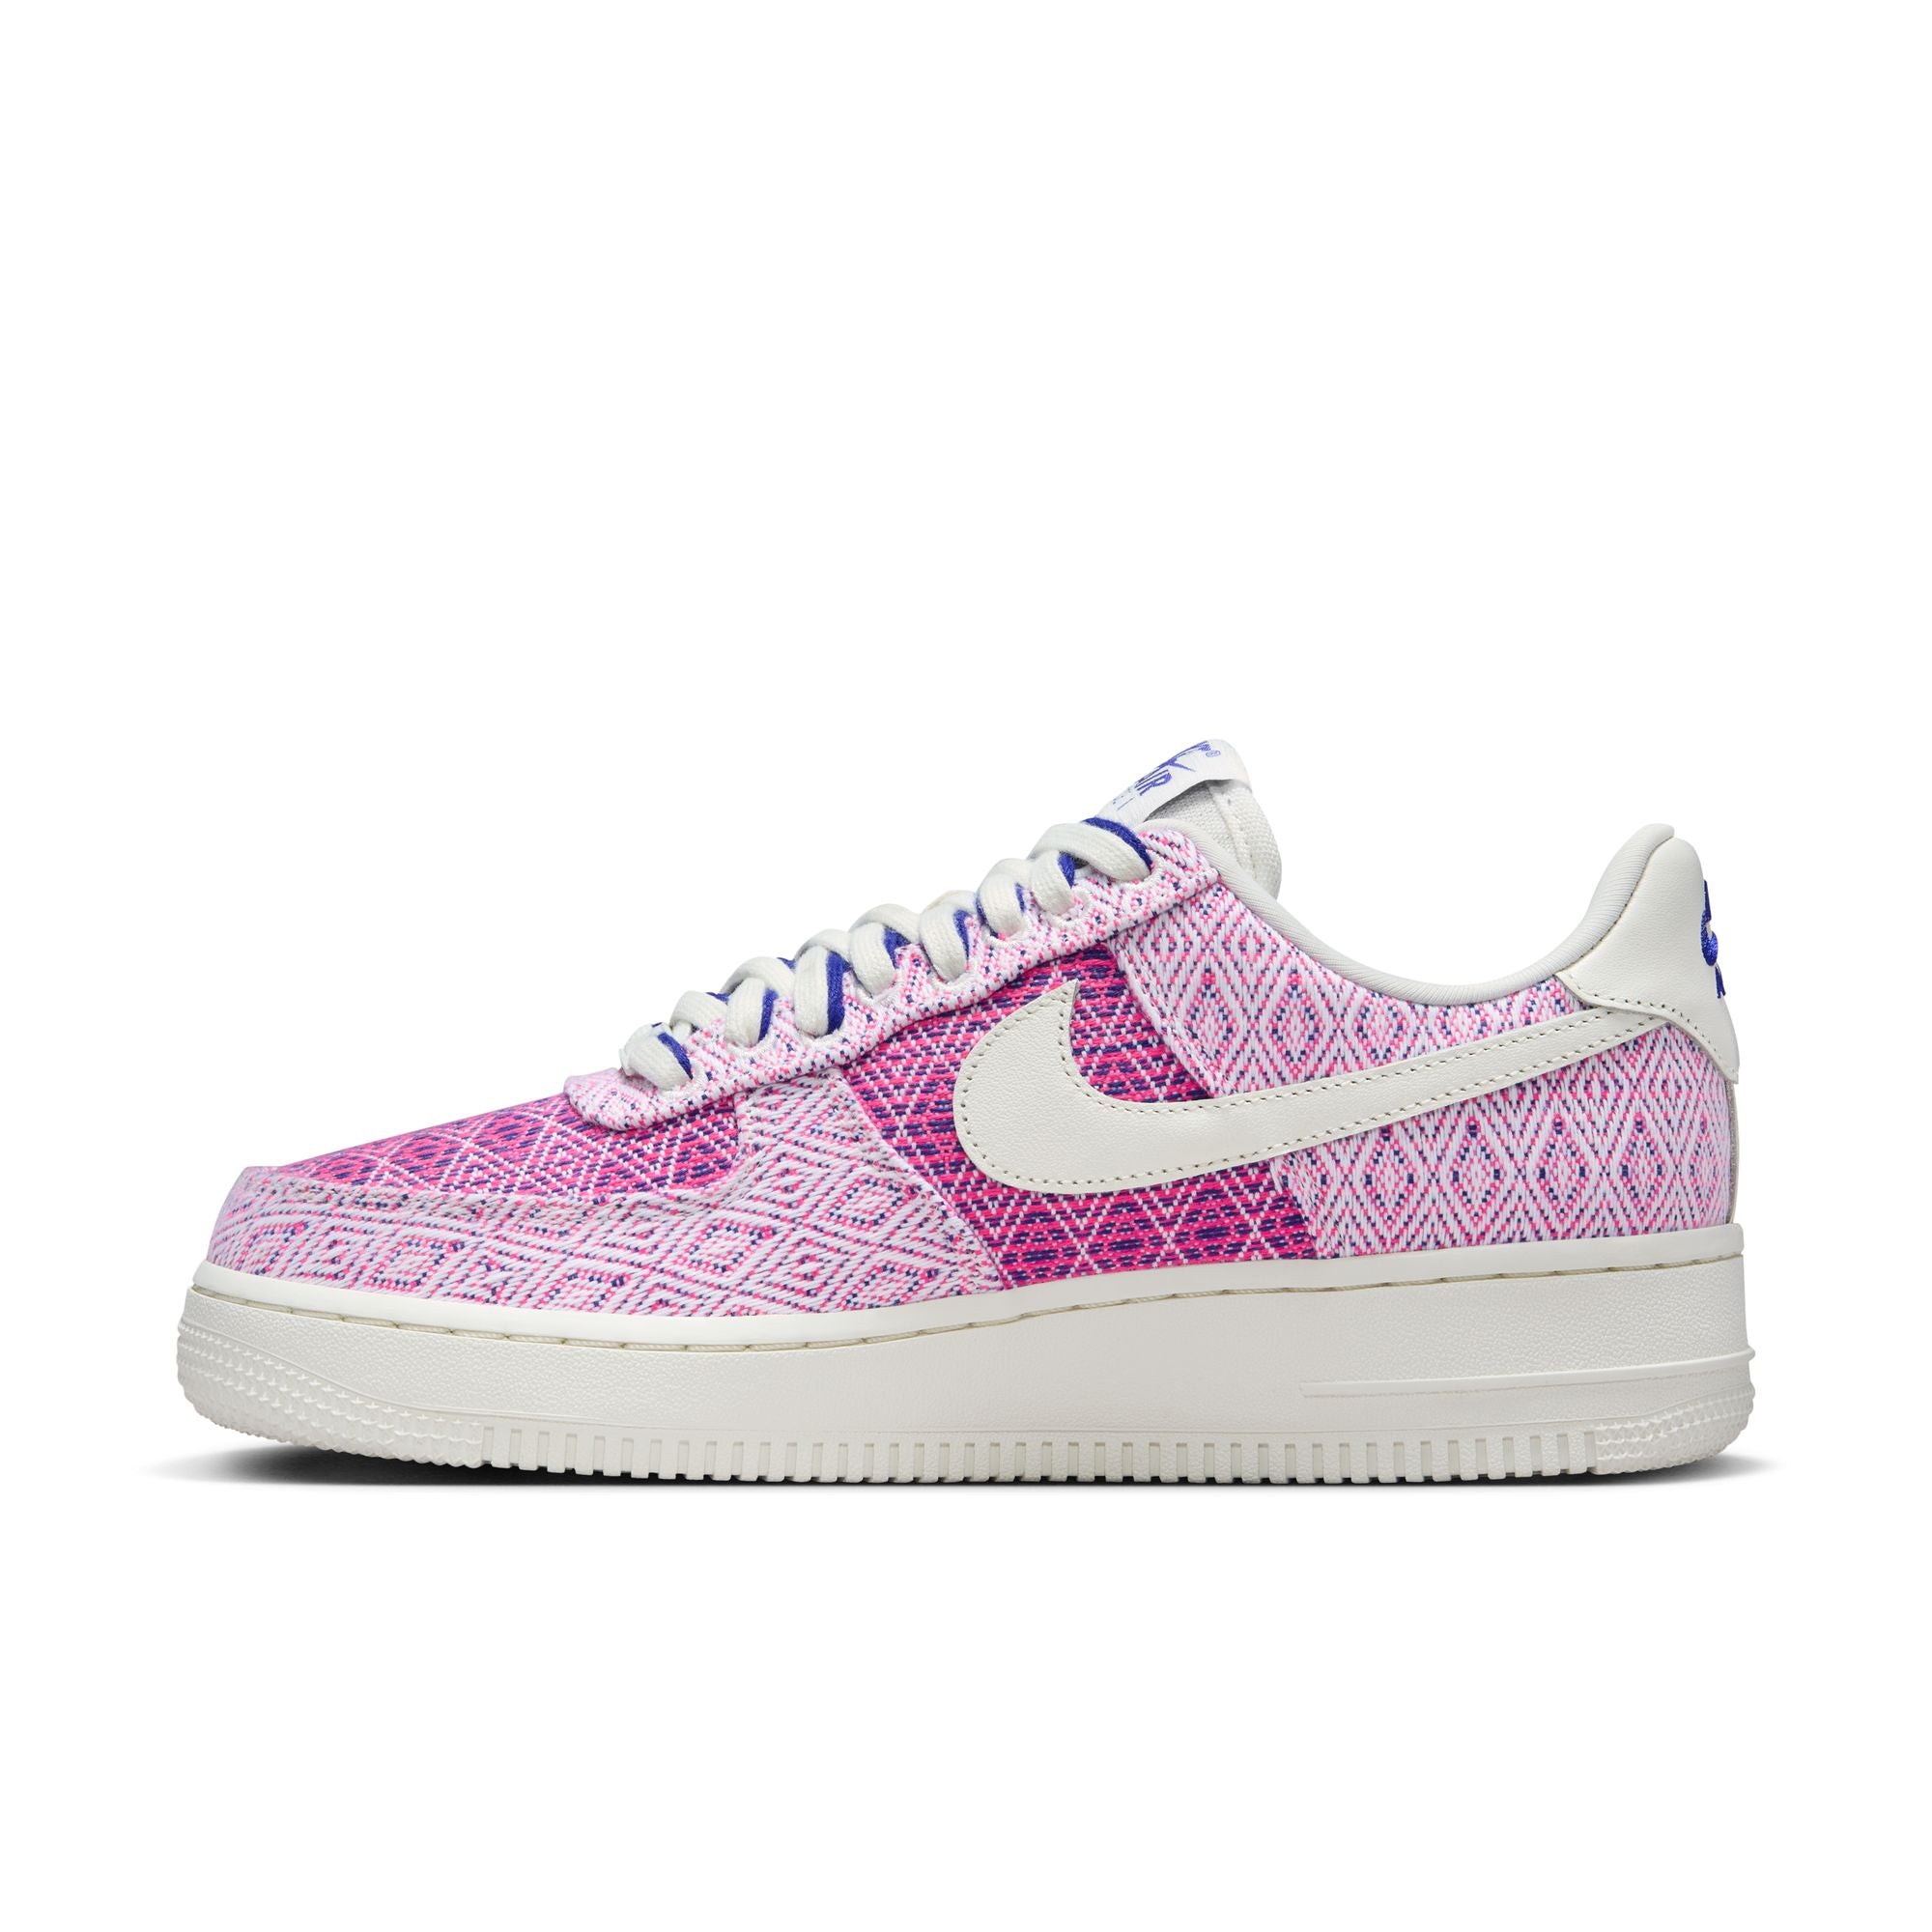 AIR FORCE 1 '07 'WOVEN TOGETHER' - MULTI-COLOR/SAIL/CONCORD/FIERCE 